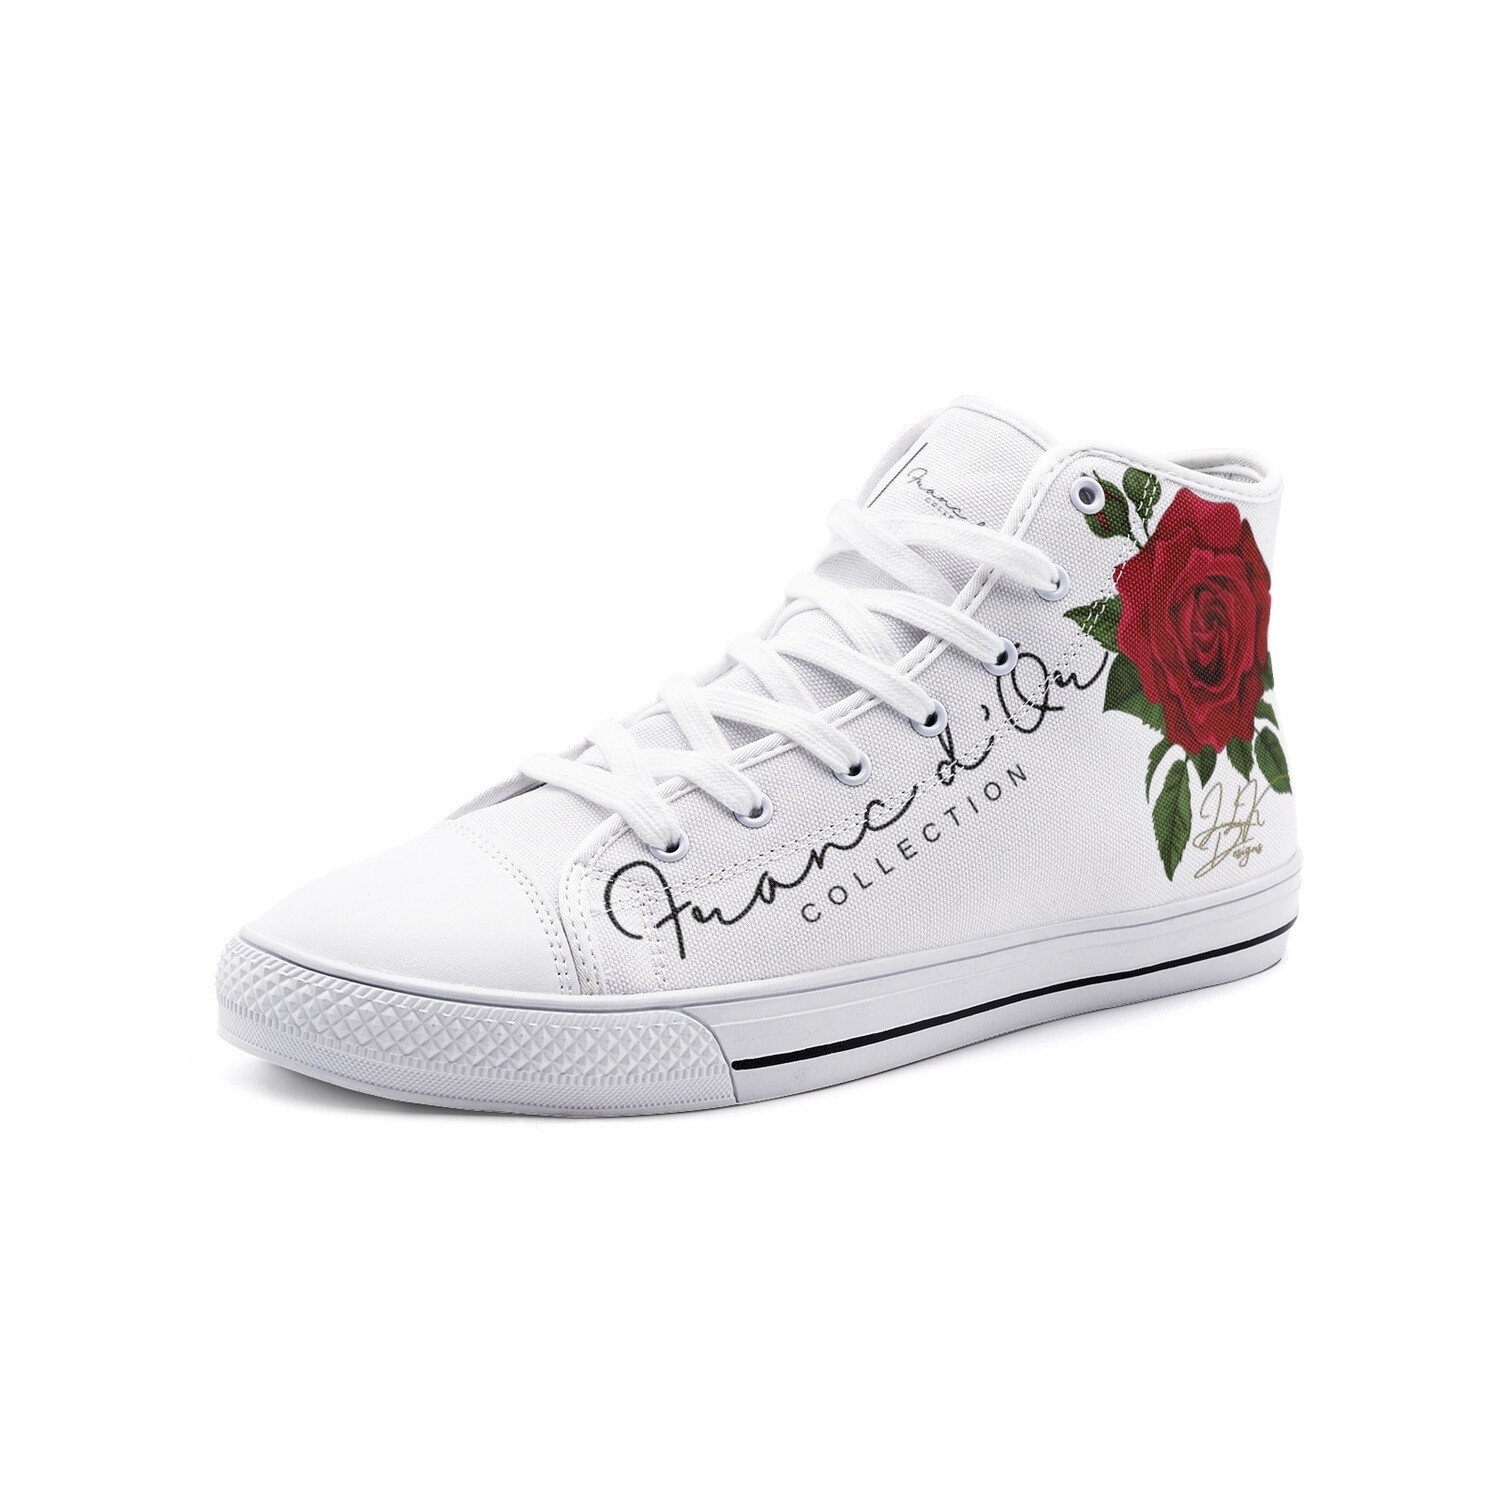 Franc d'Or Signature Collection - Rose Sneakers | JLK Designs Series